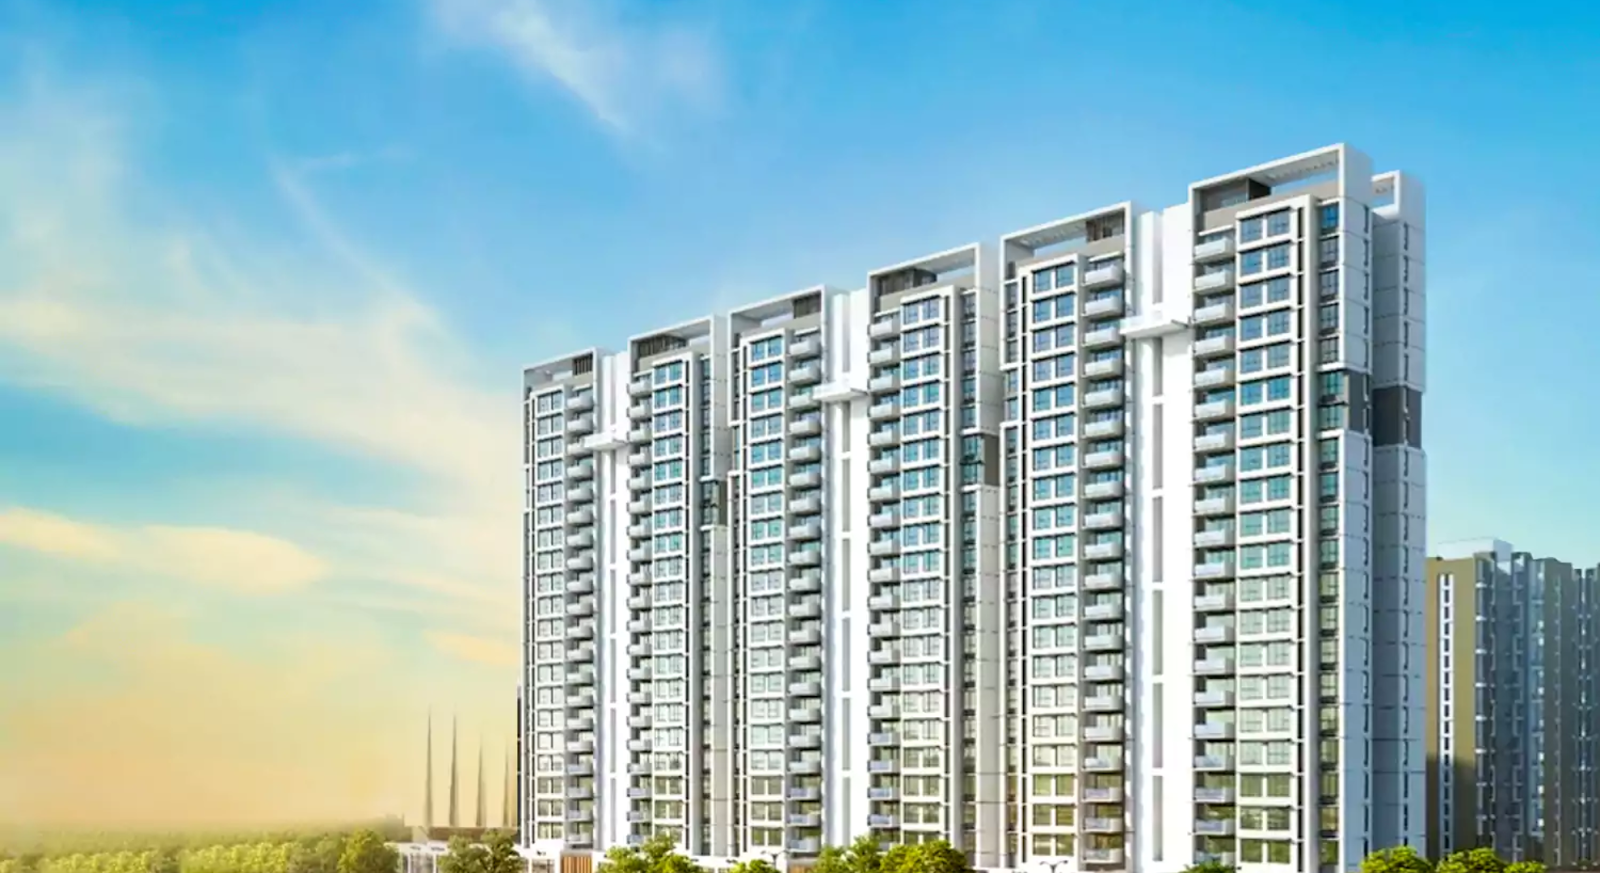 One of the most iconic development projects is named Lodha Palava City, Dombivali.